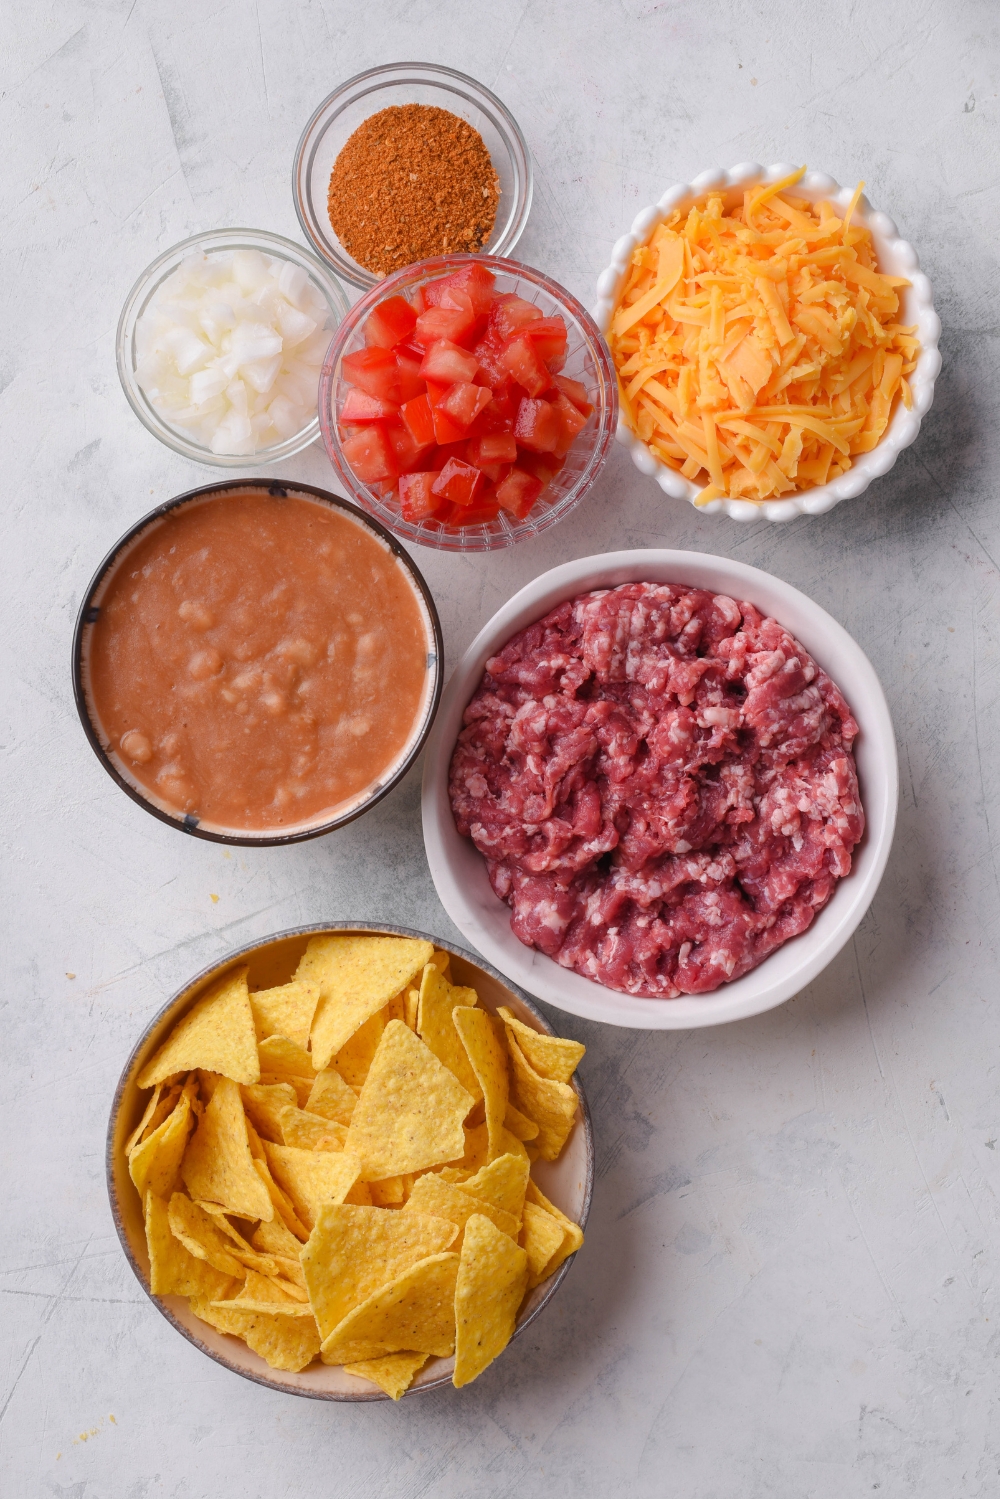 An assortment of ingredients including bowls of raw ground beef, shredded cheese, refried beans, chopped tomatoes, diced onions, and tortilla chips.